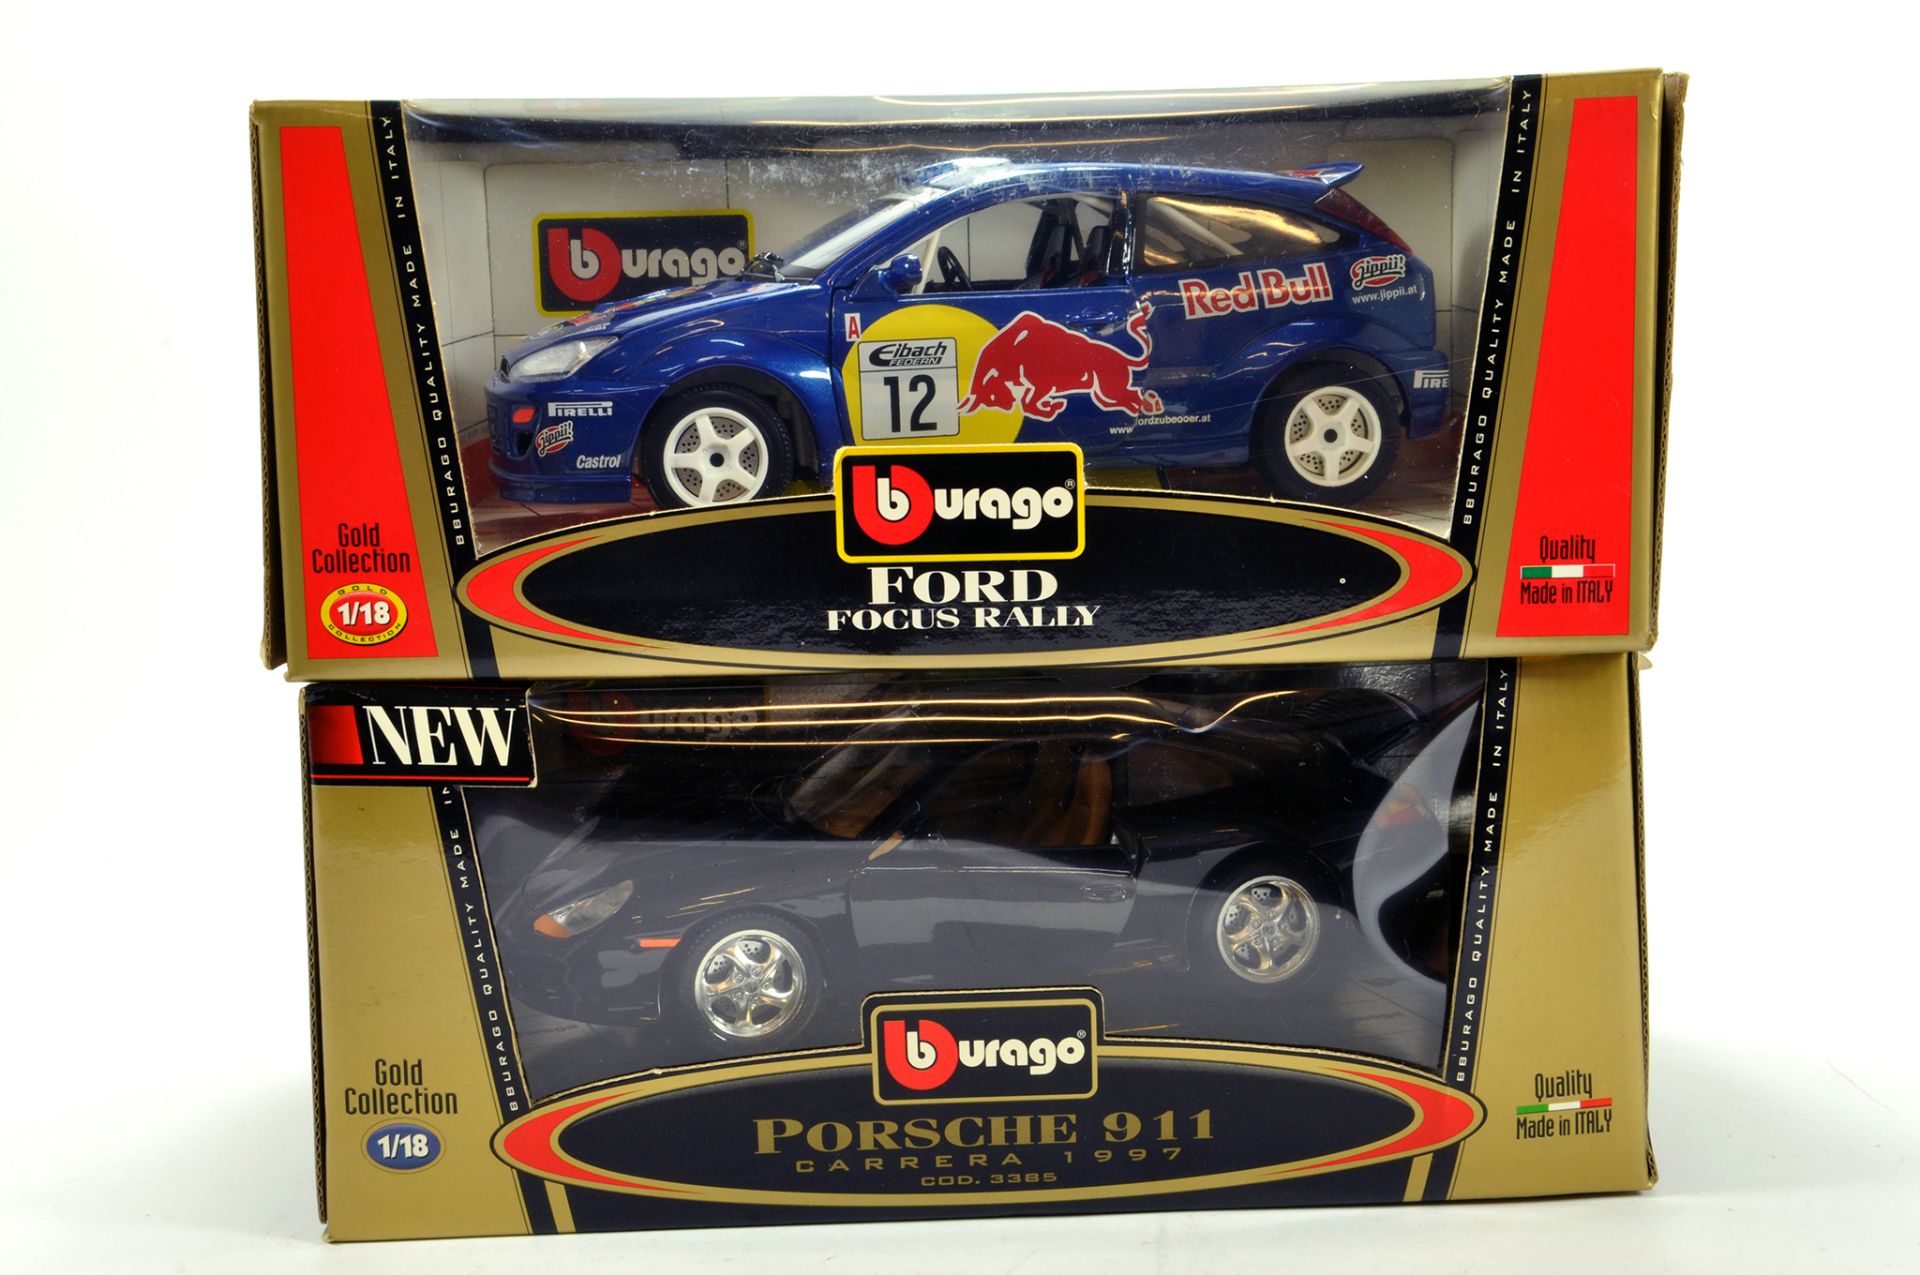 Burago 1/18 diecast issues comprising Ford Focus Rally and Porsche 911. NM in Boxes. (2)